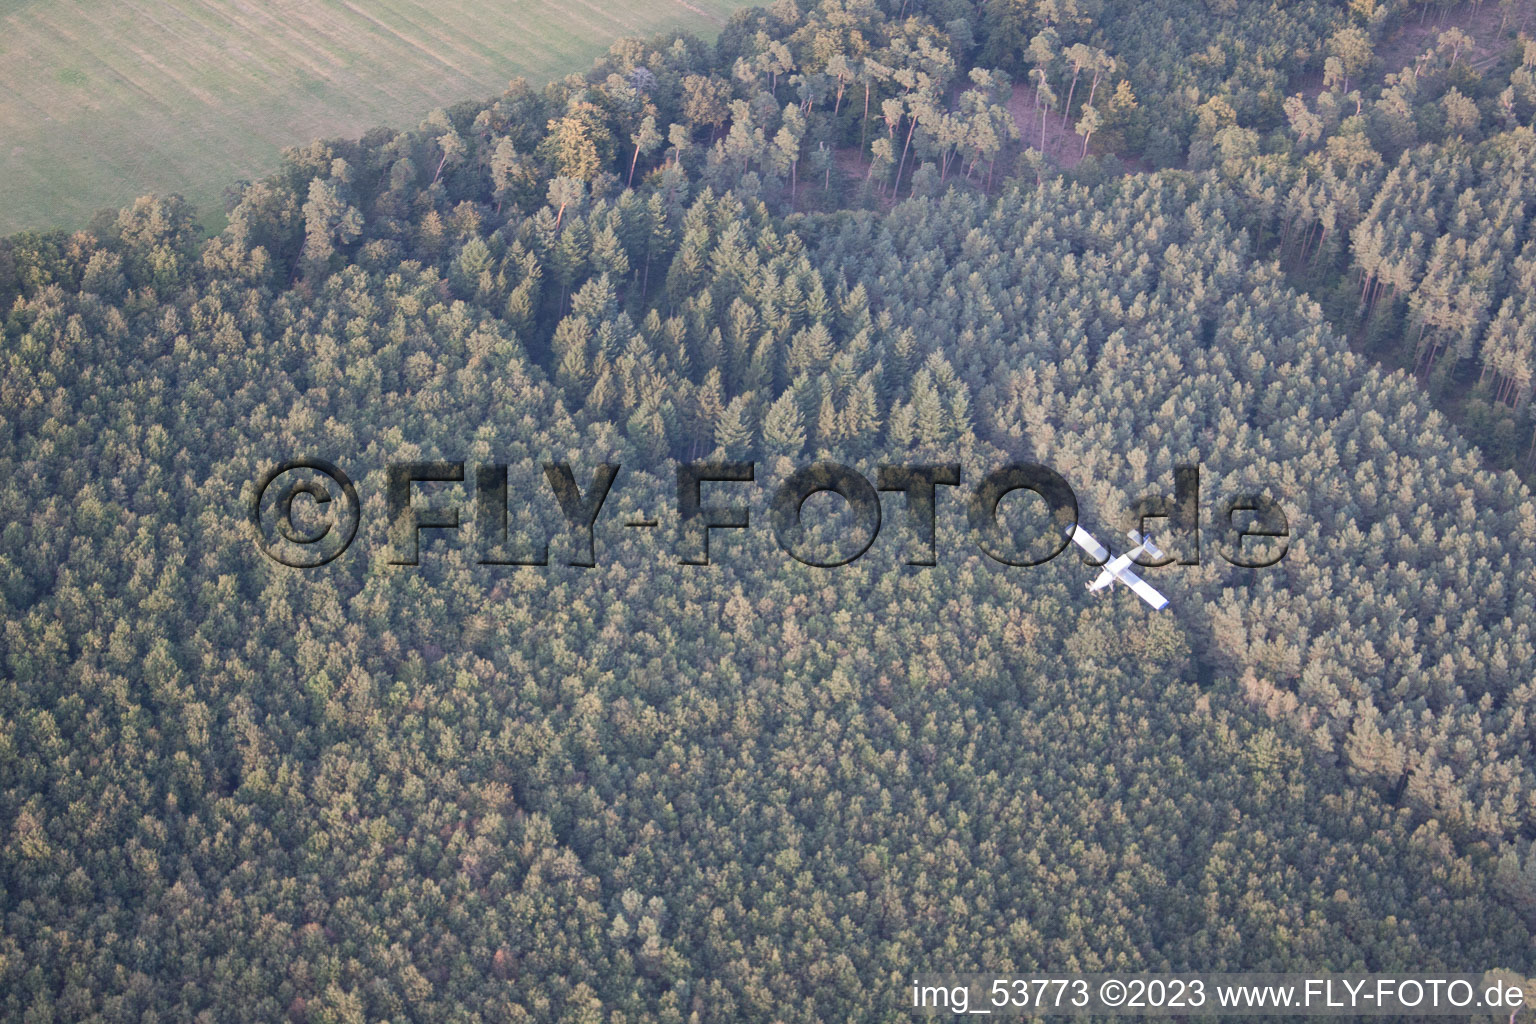 Porter Airfield in a dive after a parachutist drop in Schweighofen in the state Rhineland-Palatinate, Germany